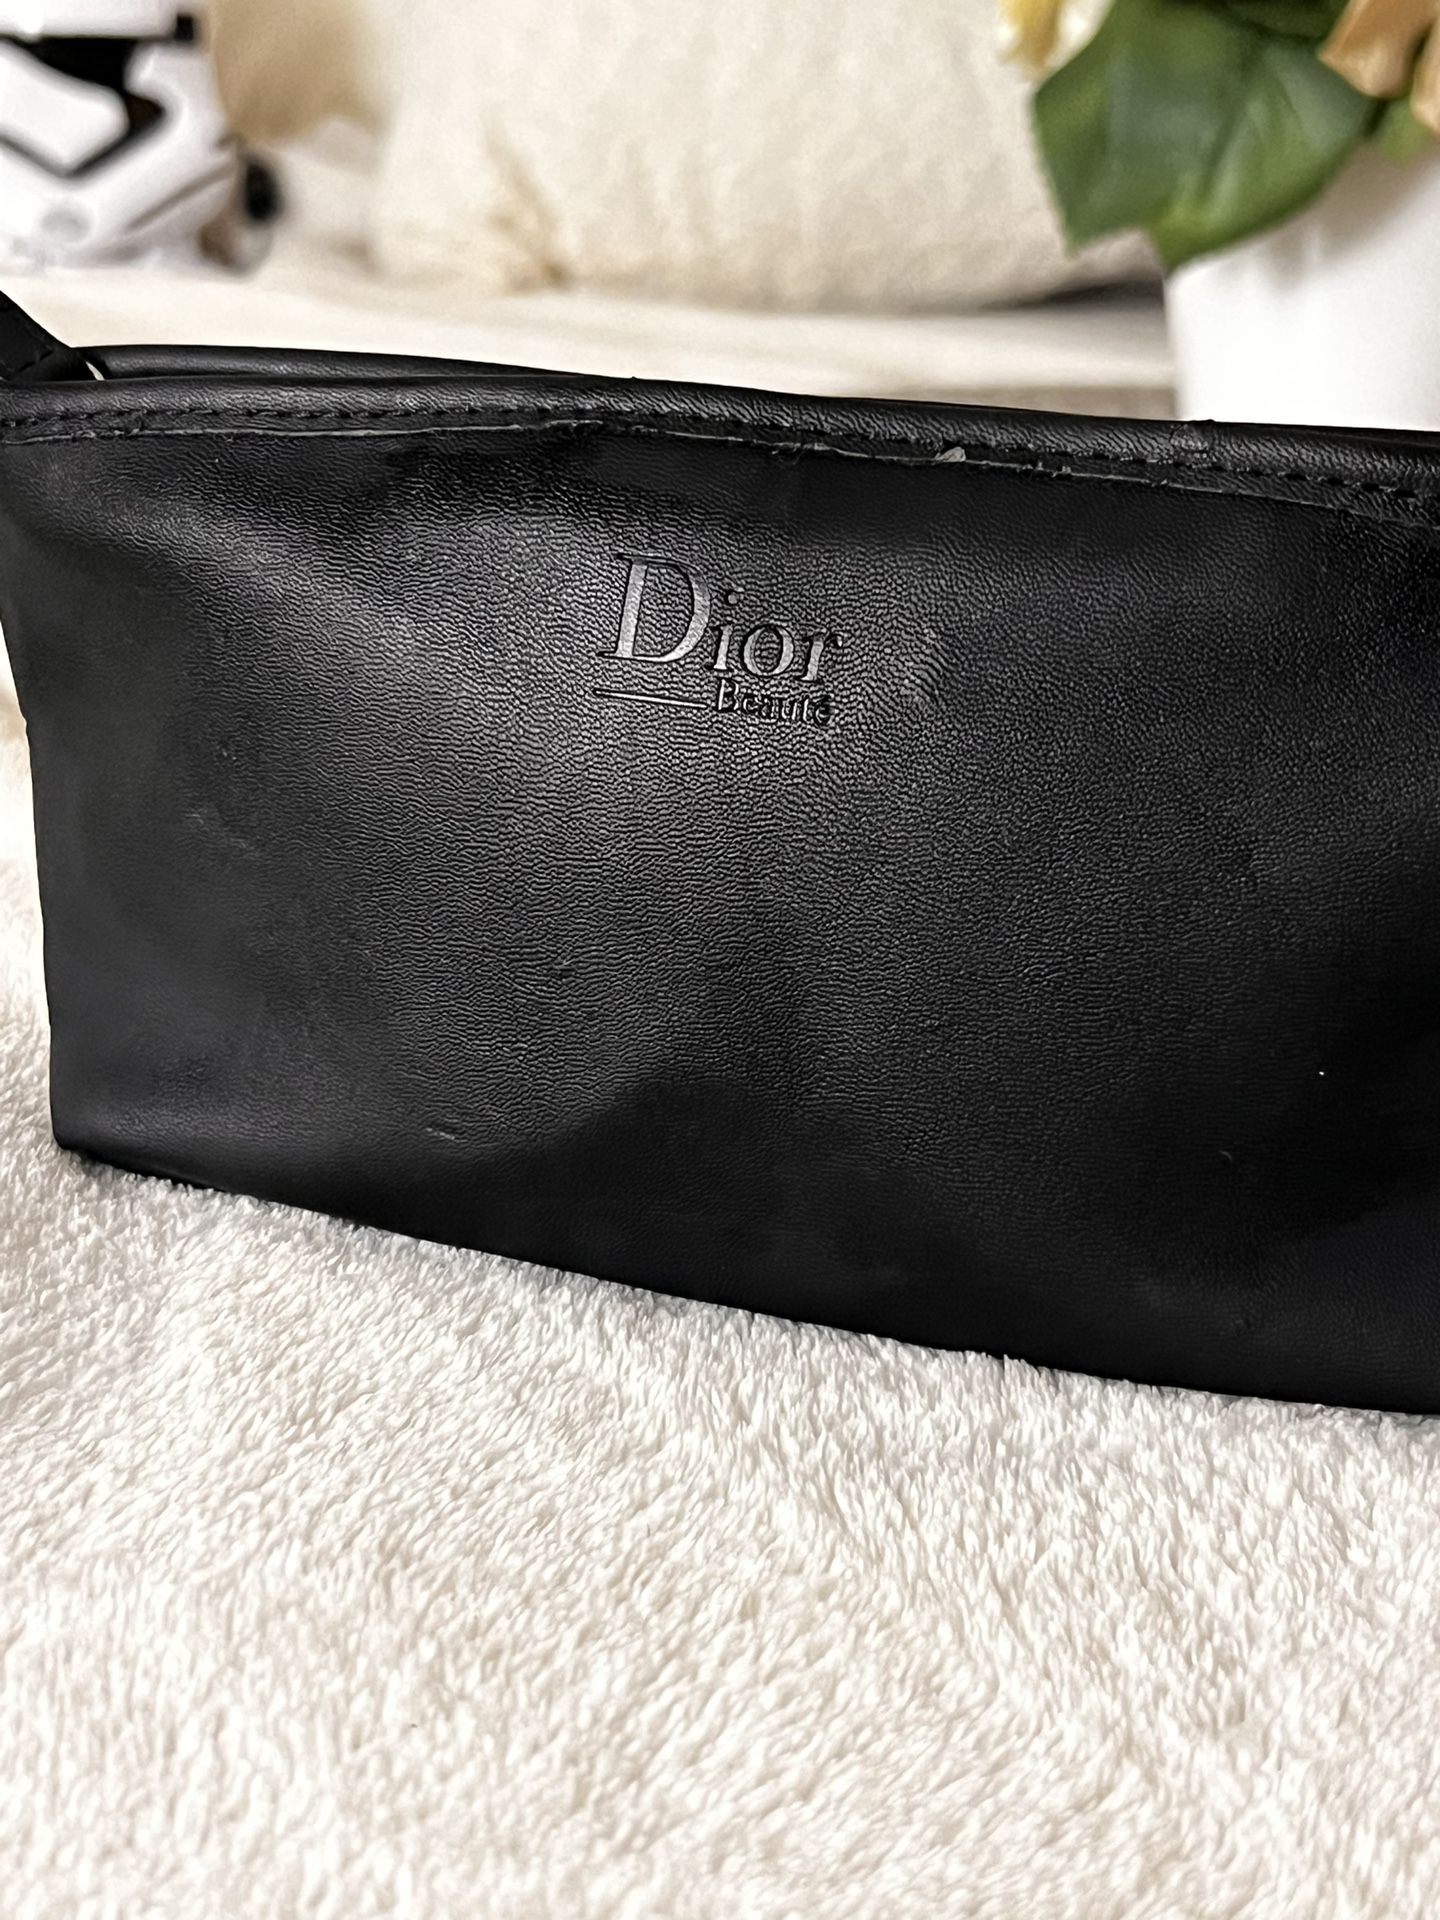 Christian Dior Toiletry Leather Case Purse Bag 